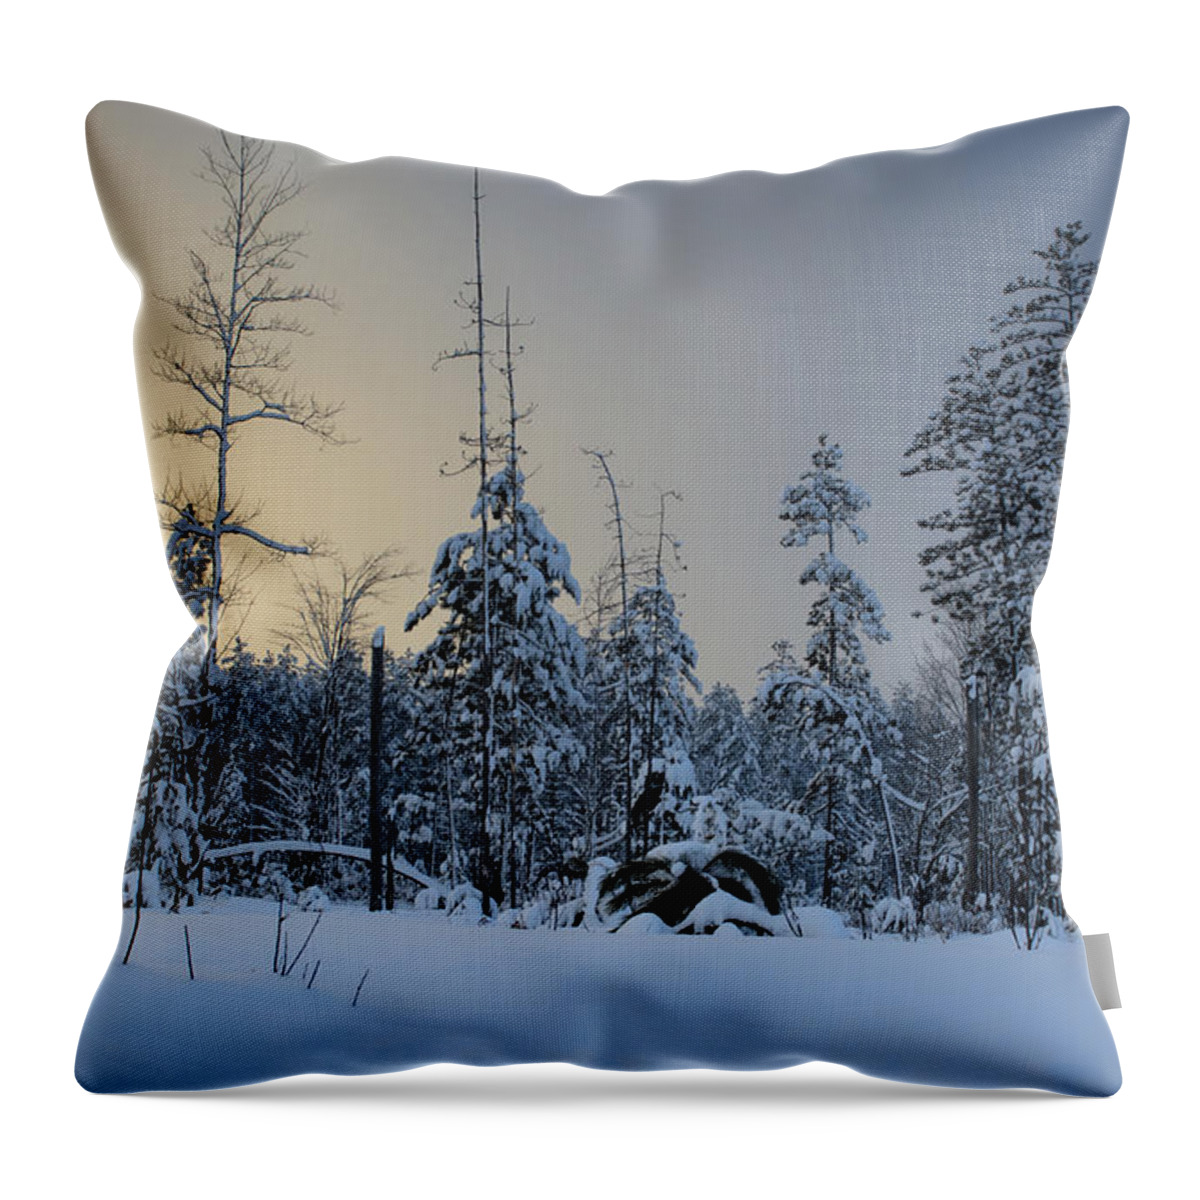  Throw Pillow featuring the photograph Ufo II by Dan Hefle